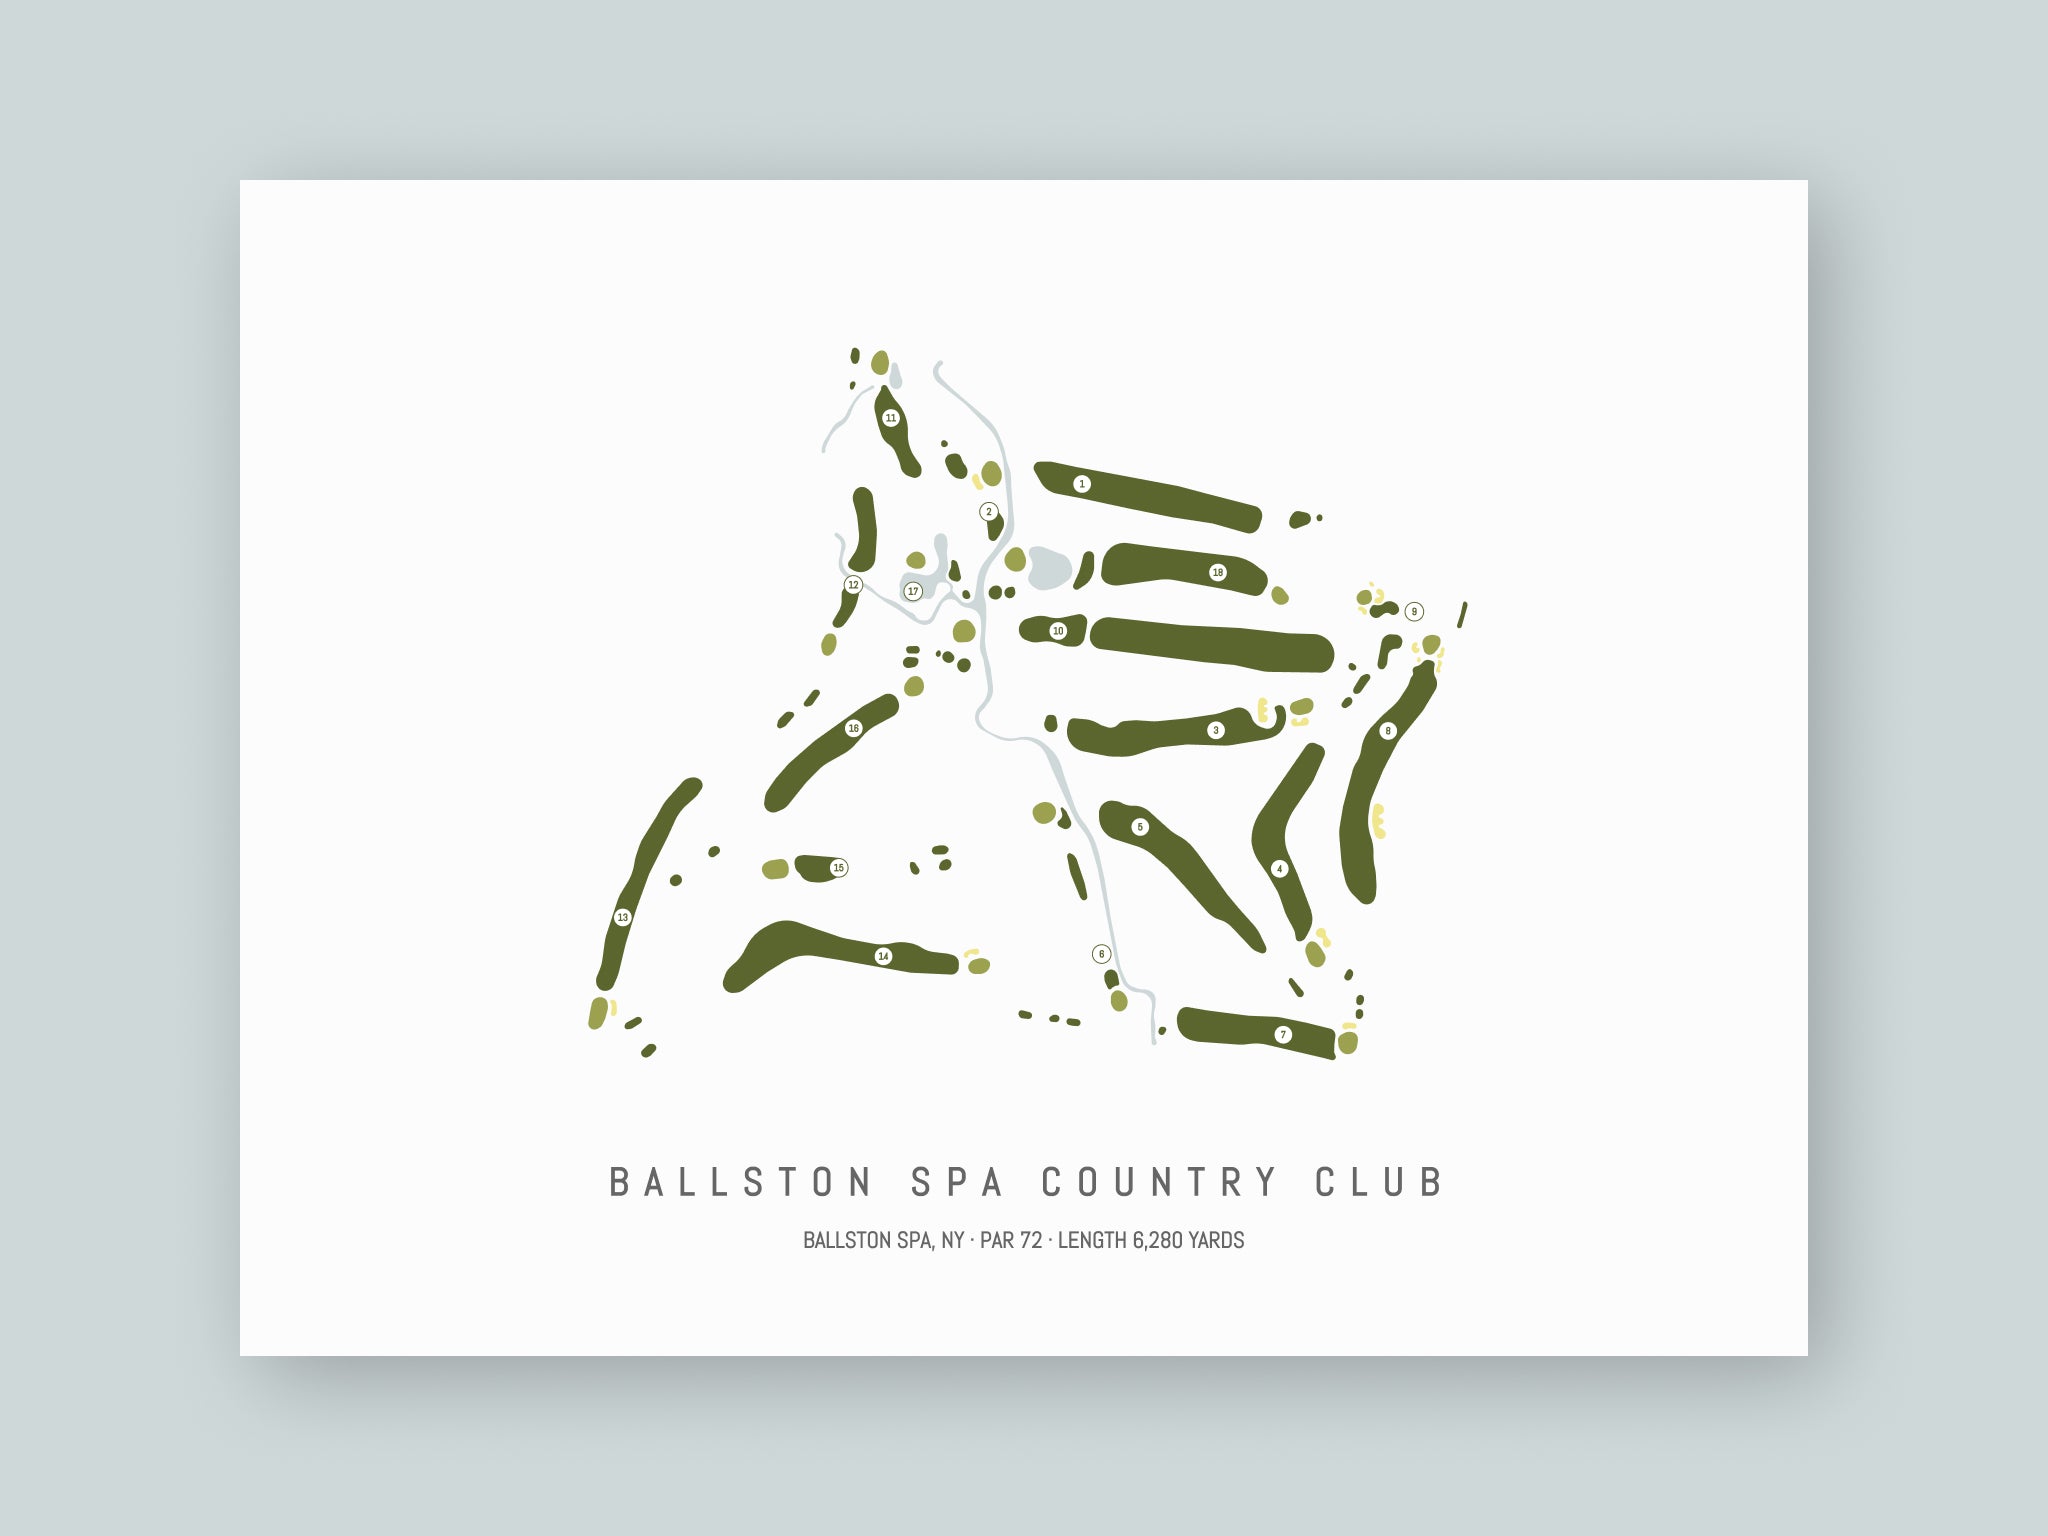 Ballston-Spa-Country-Club-NY--Unframed-24x18-With-Hole-Numbers